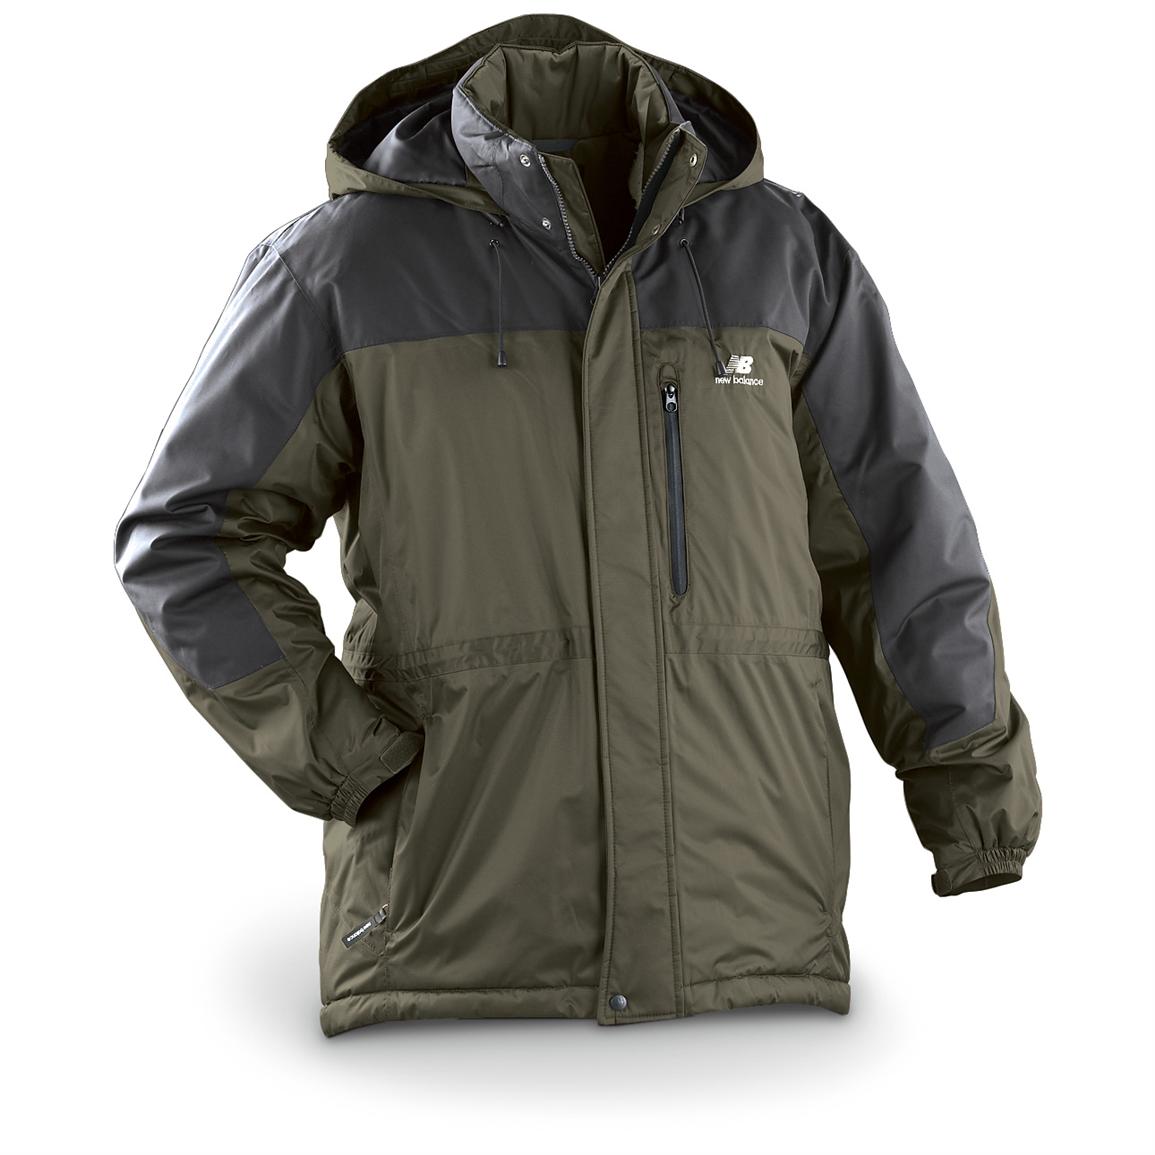 New Balance® Parka - 151764, Insulated Jackets & Coats at Sportsman's Guide